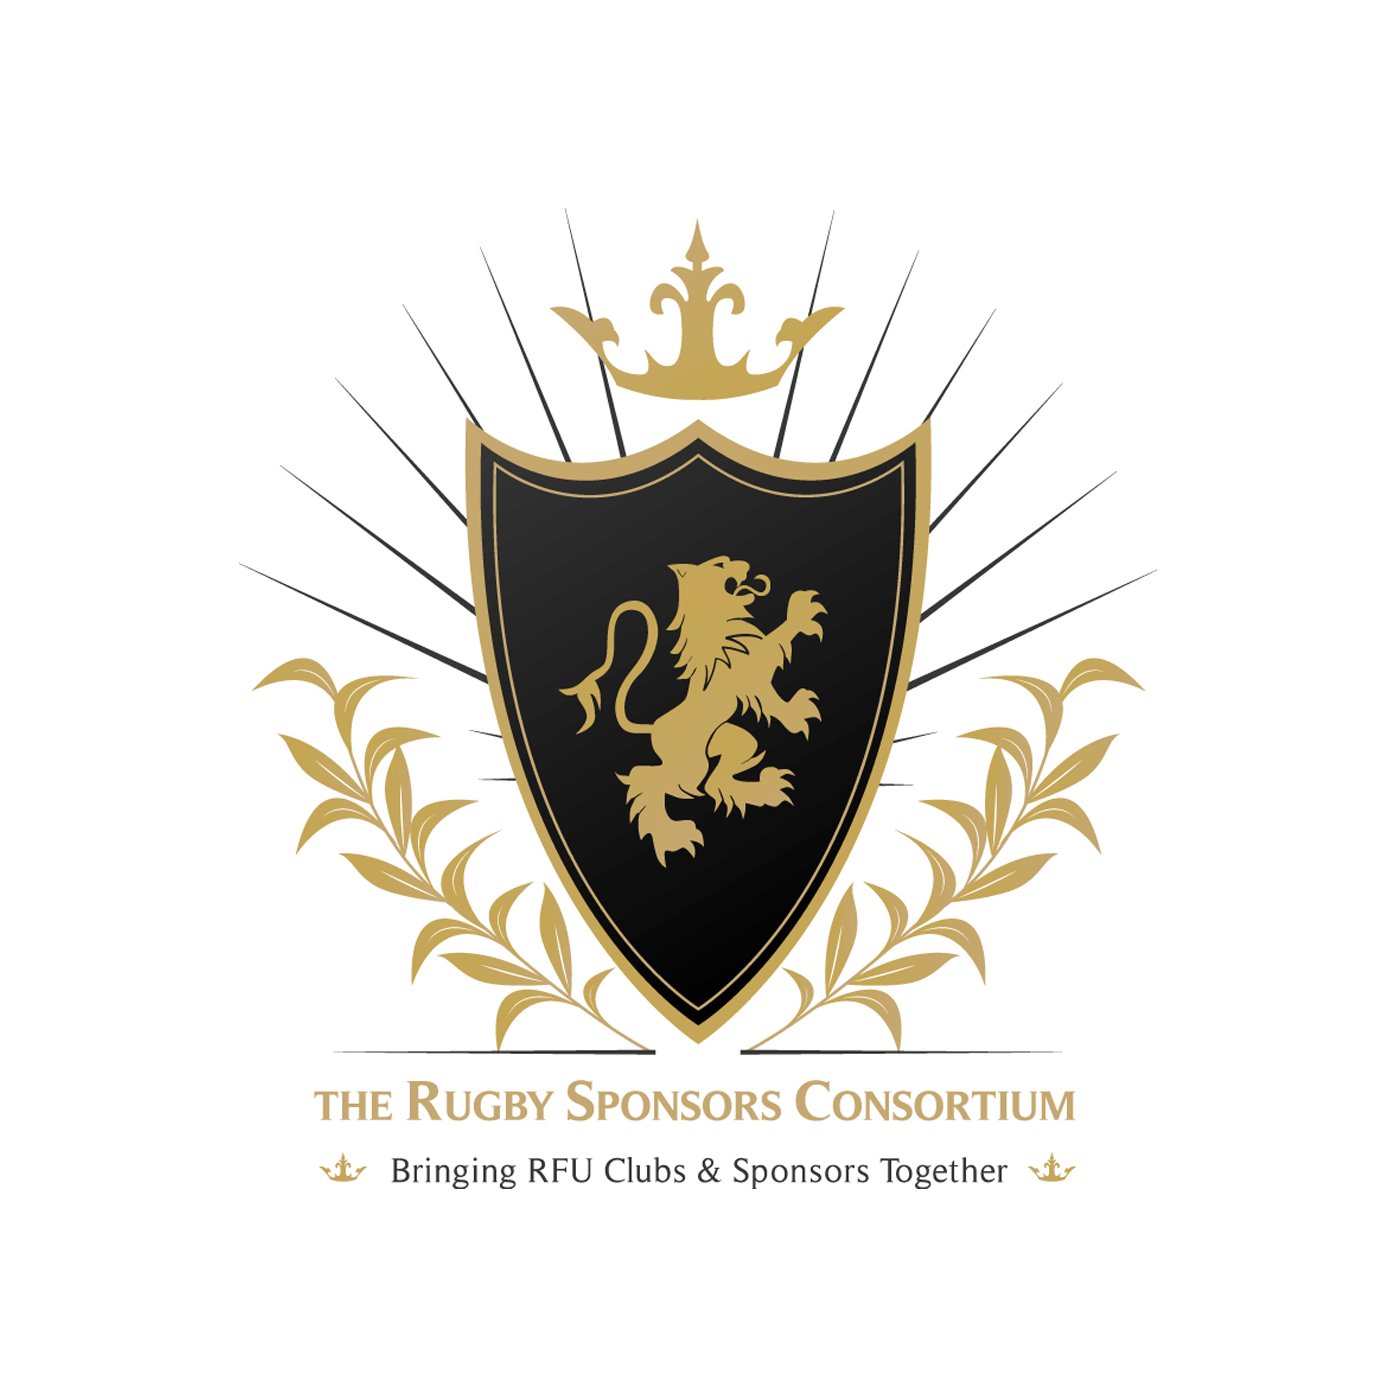 The RSC is run by local businesses who are active sponsors of local rugby clubs. 
#Networking #RugbyClub